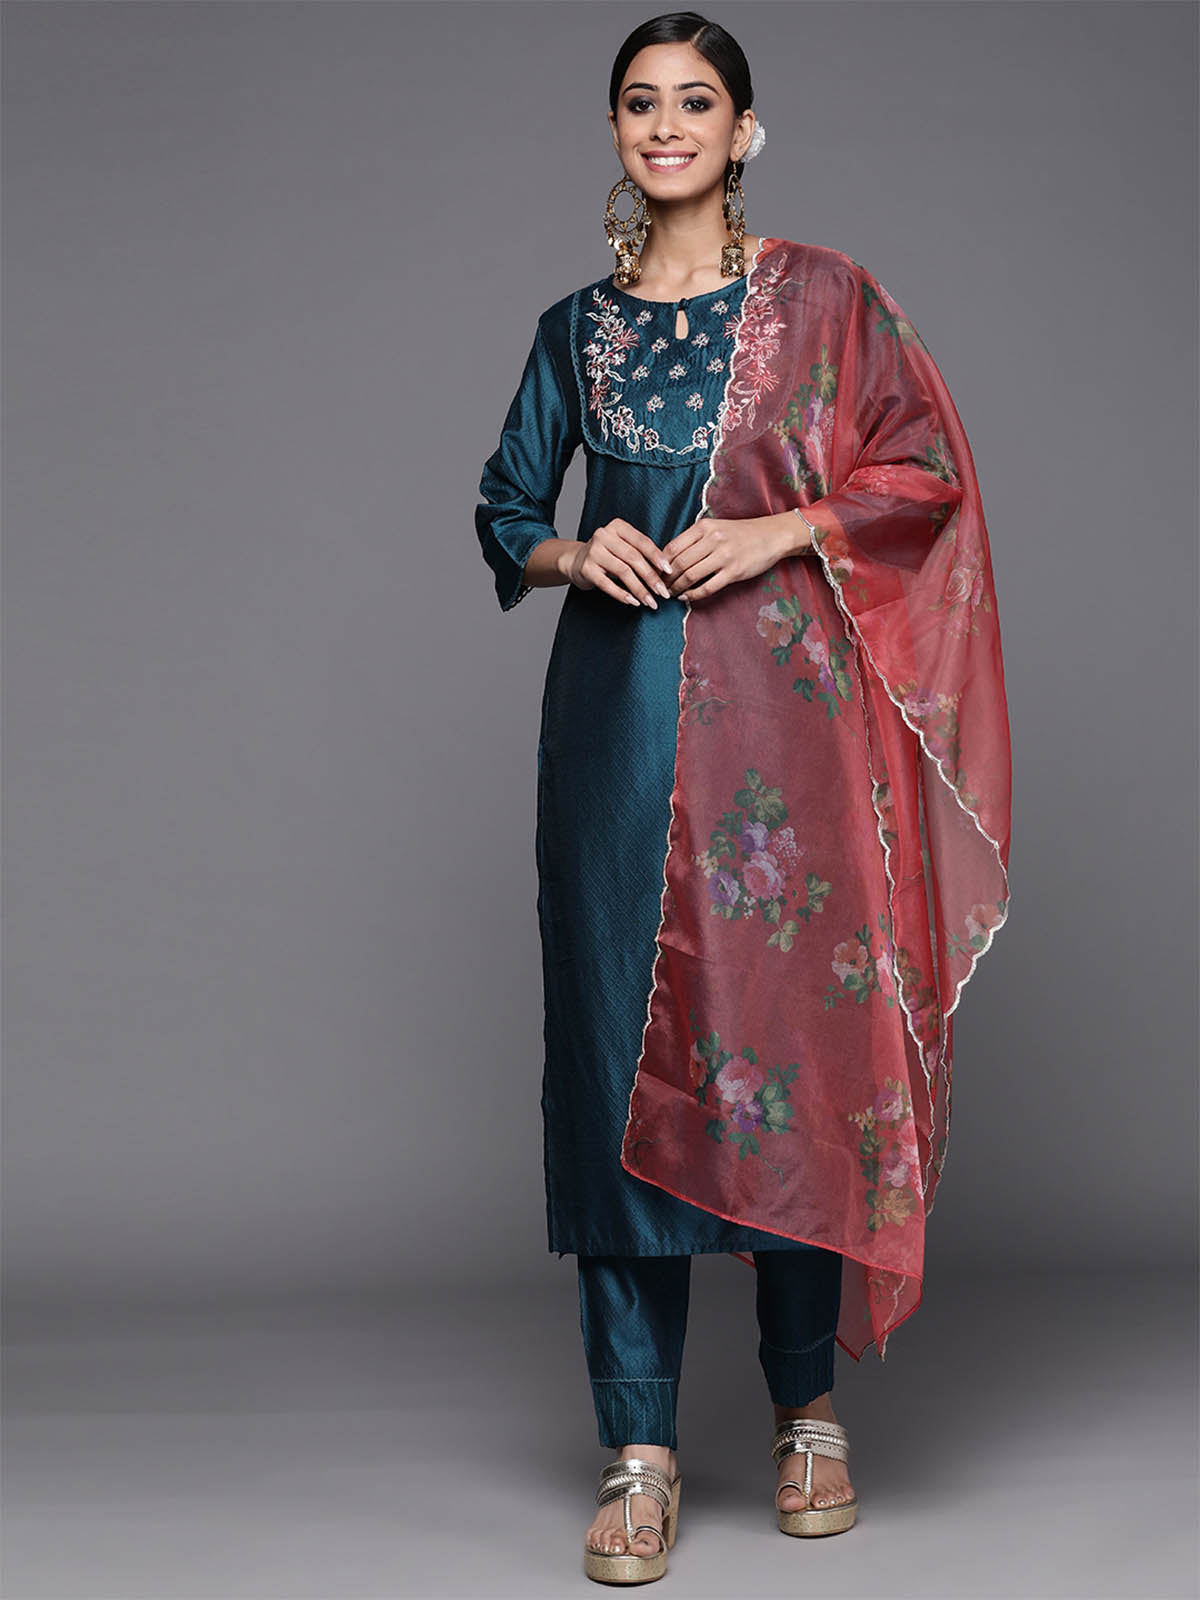 Women's Blue Embroidered Straight Kurta Trousers With Dupatta Set - Odette